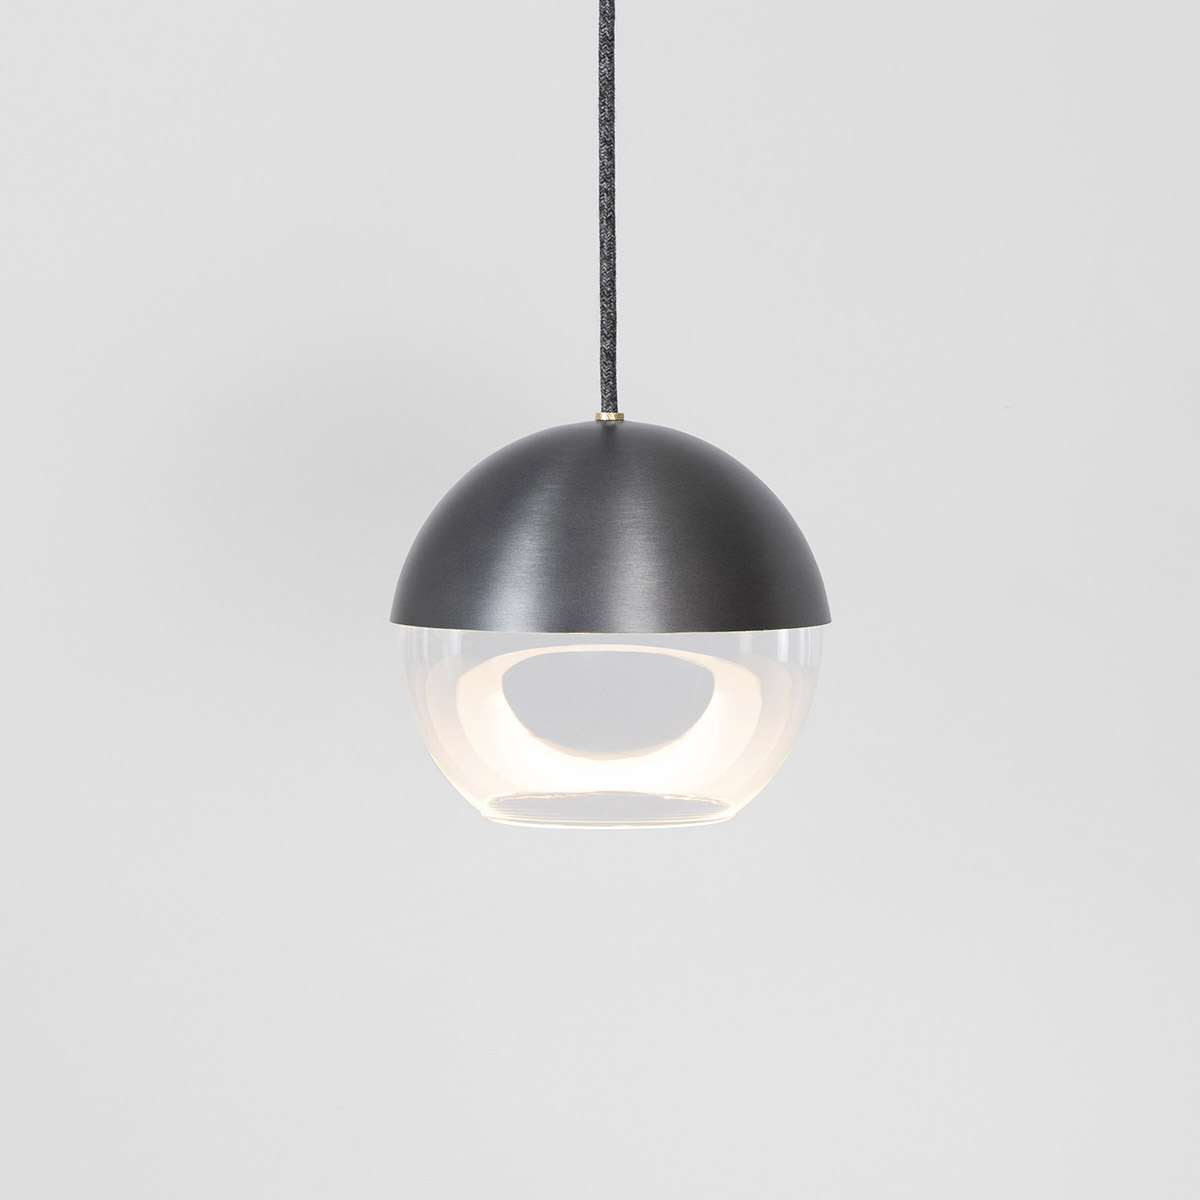 The 8” Muse pendant light globe utilizes a source disk that floats while reflecting indirect light.